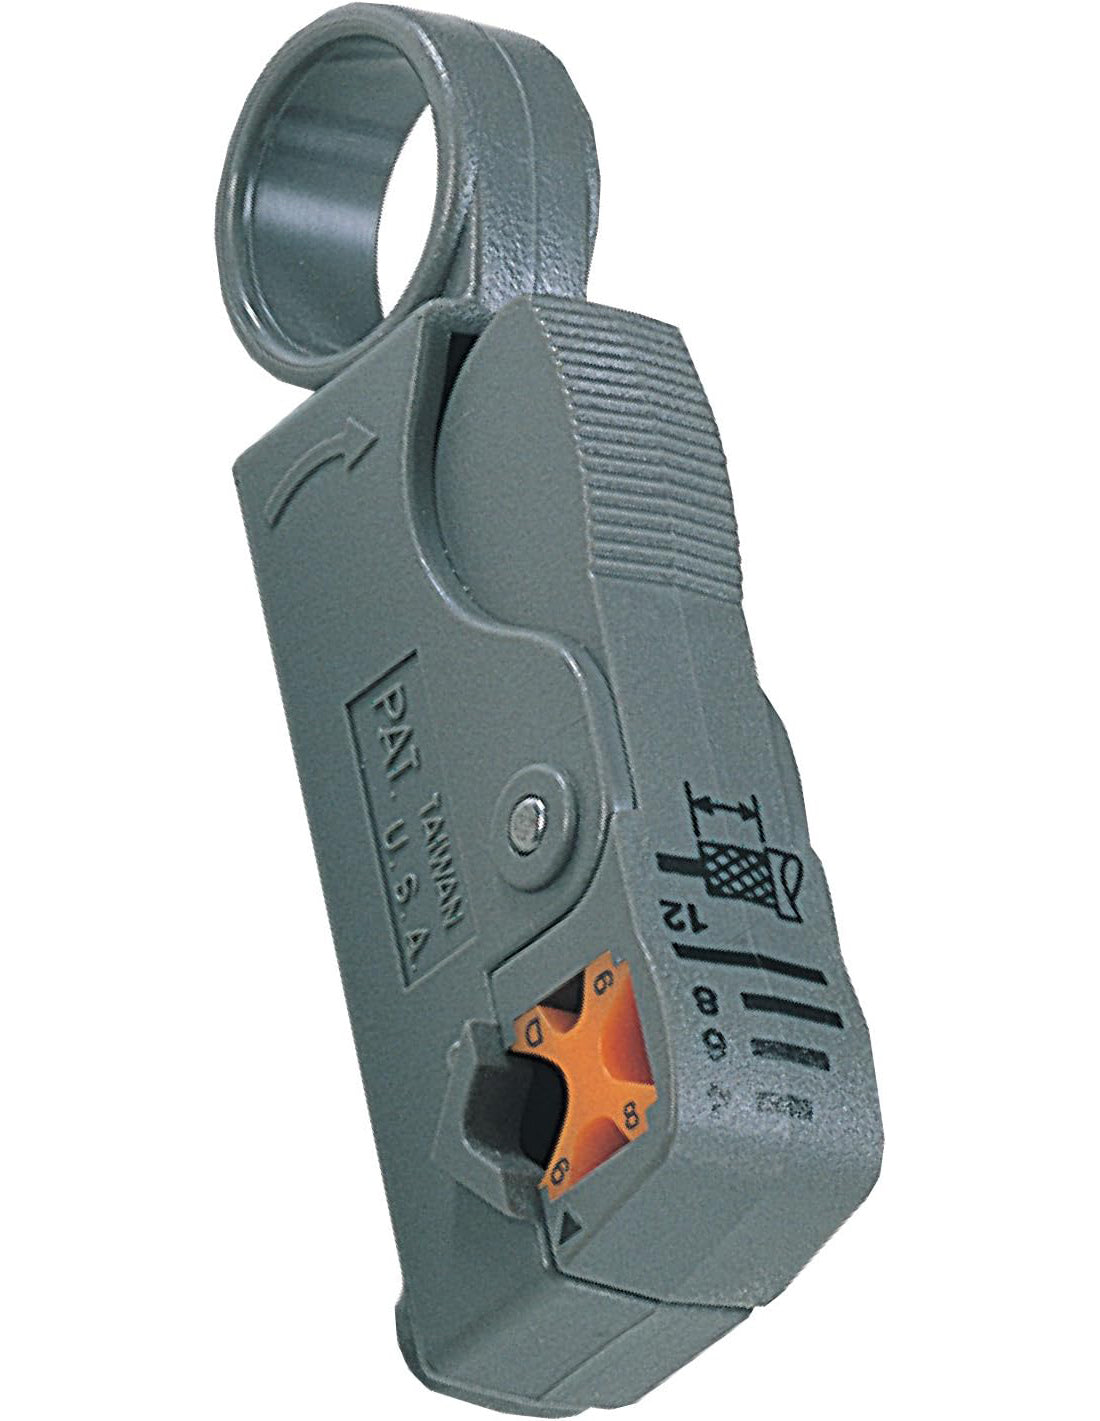 Pro'skit Rotating Coaxial Cable Stripper, Cable Stripper with Adjustable Blade for Coaxial Cables